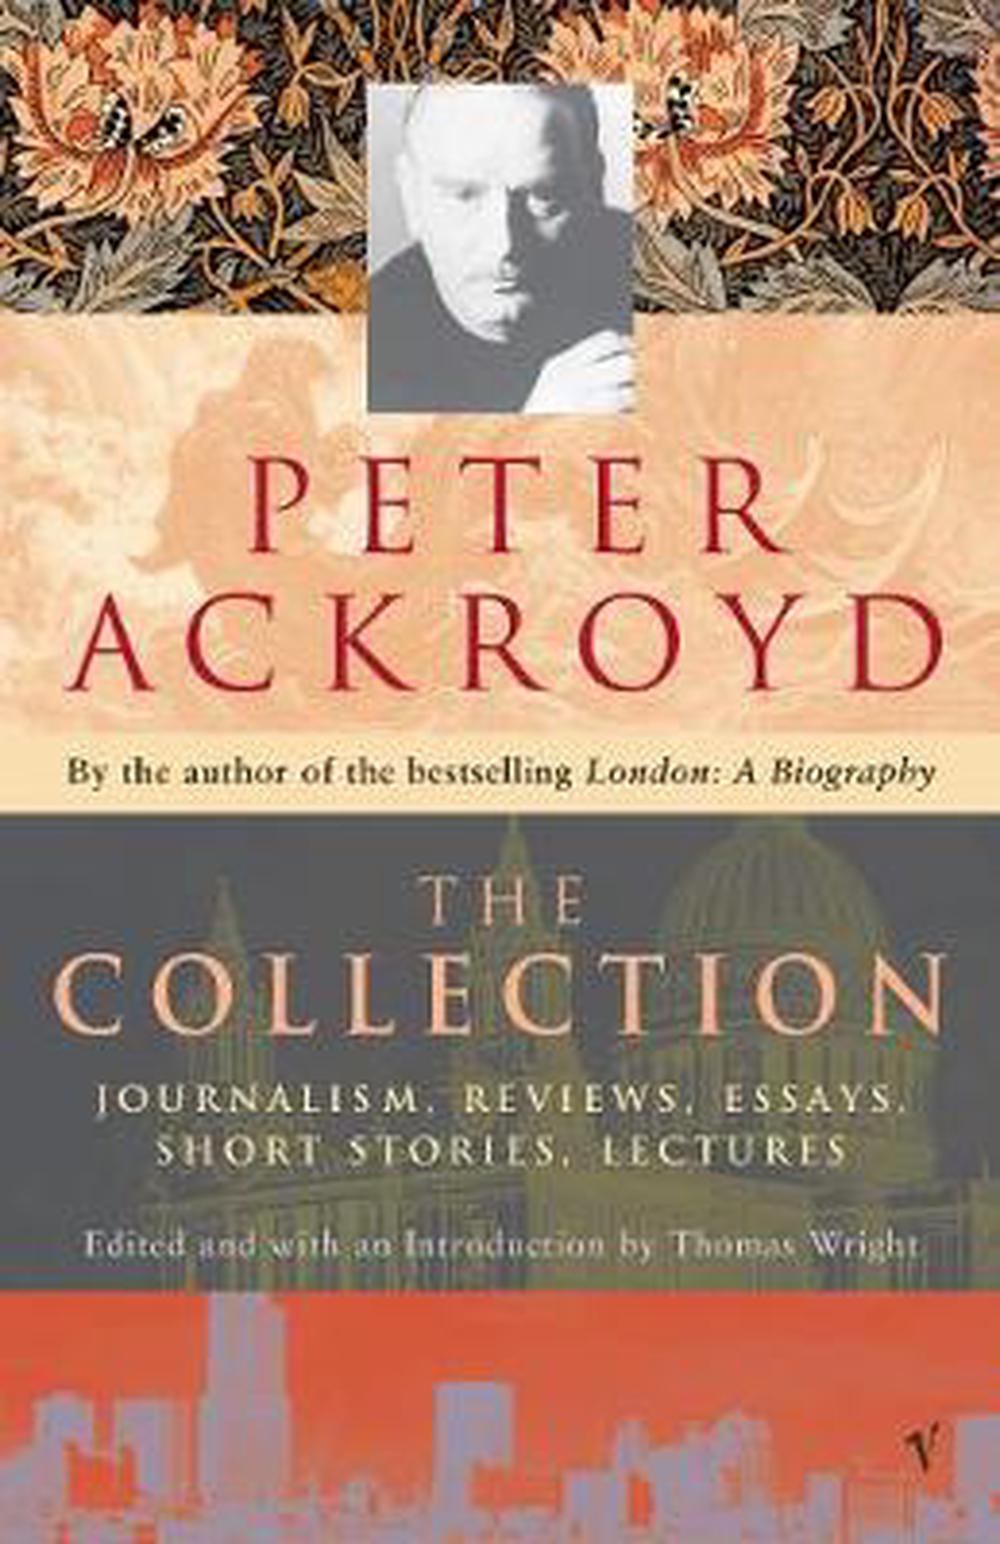 The Collection by Peter Ackroyd, Paperback, 9780099428947 | Buy online ...